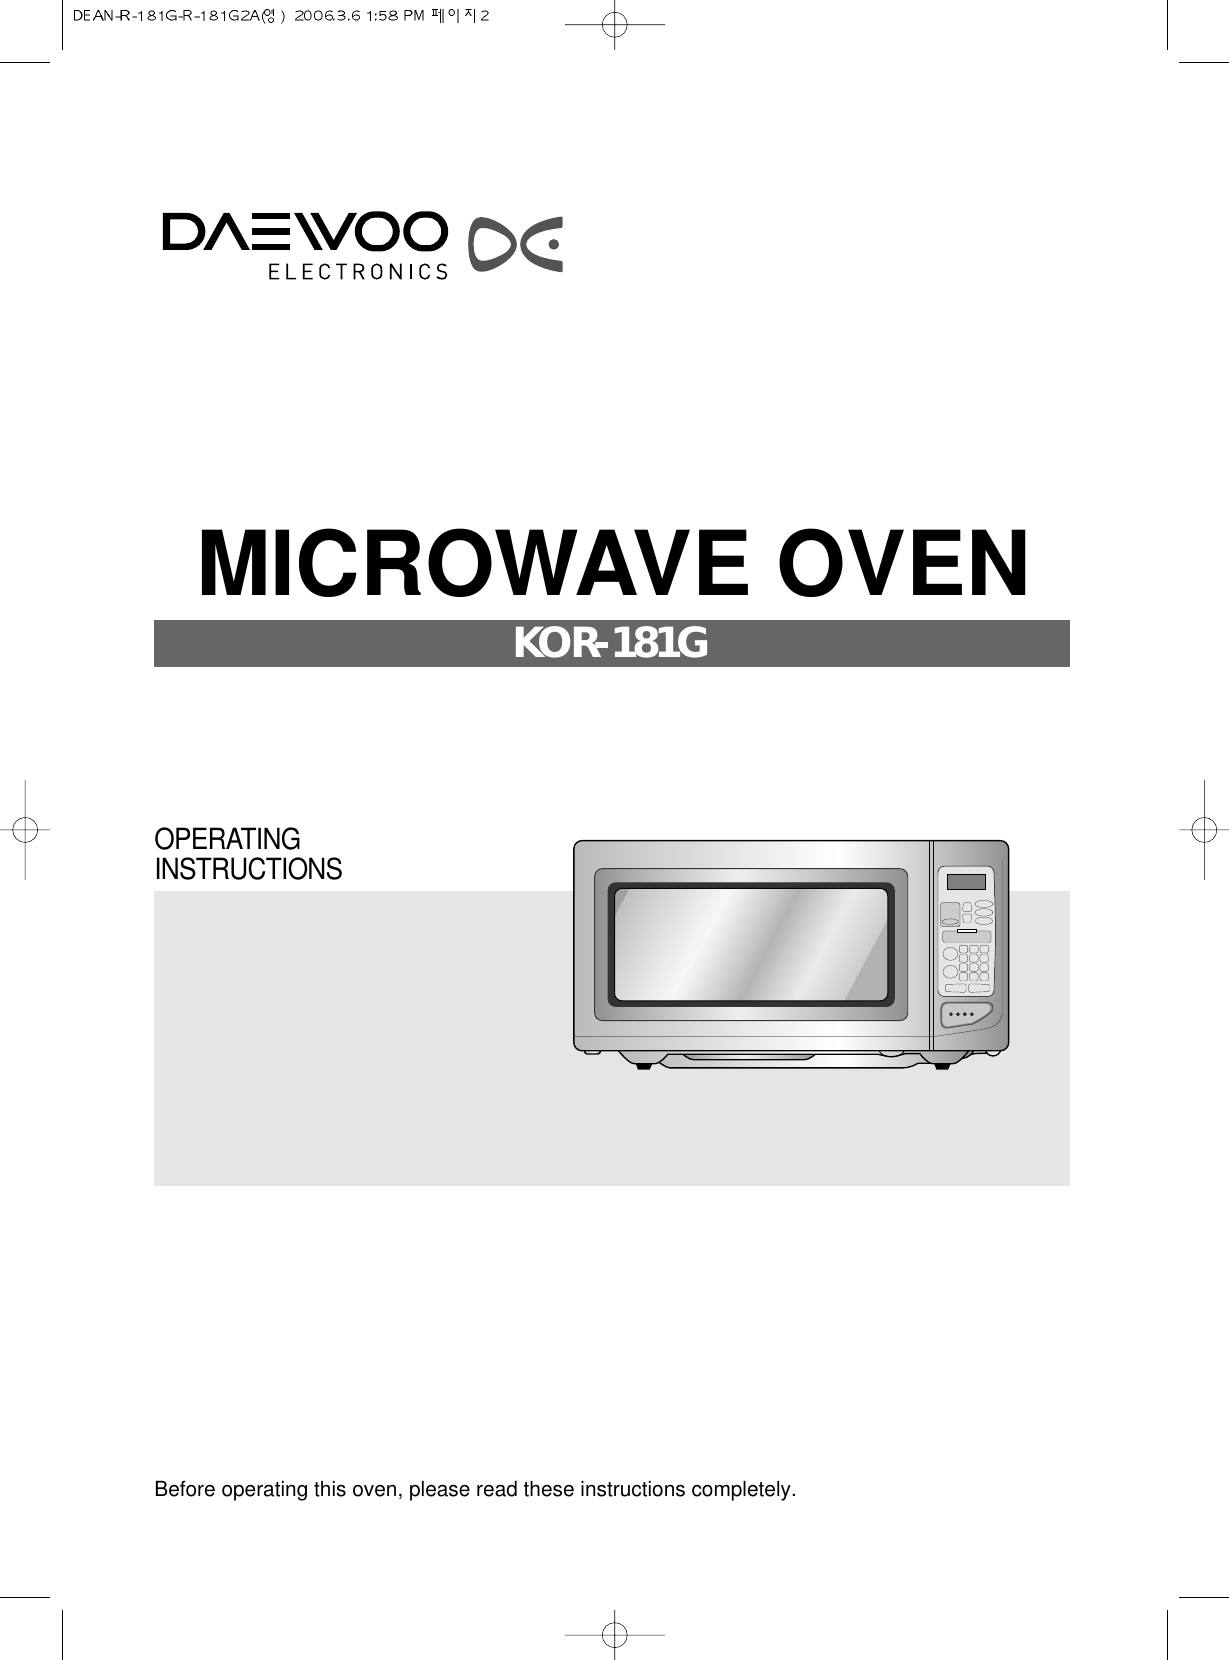 MICROWAVE OVENKOR-181GBefore operating this oven, please read these instructions completely.OPERATINGINSTRUCTIONS